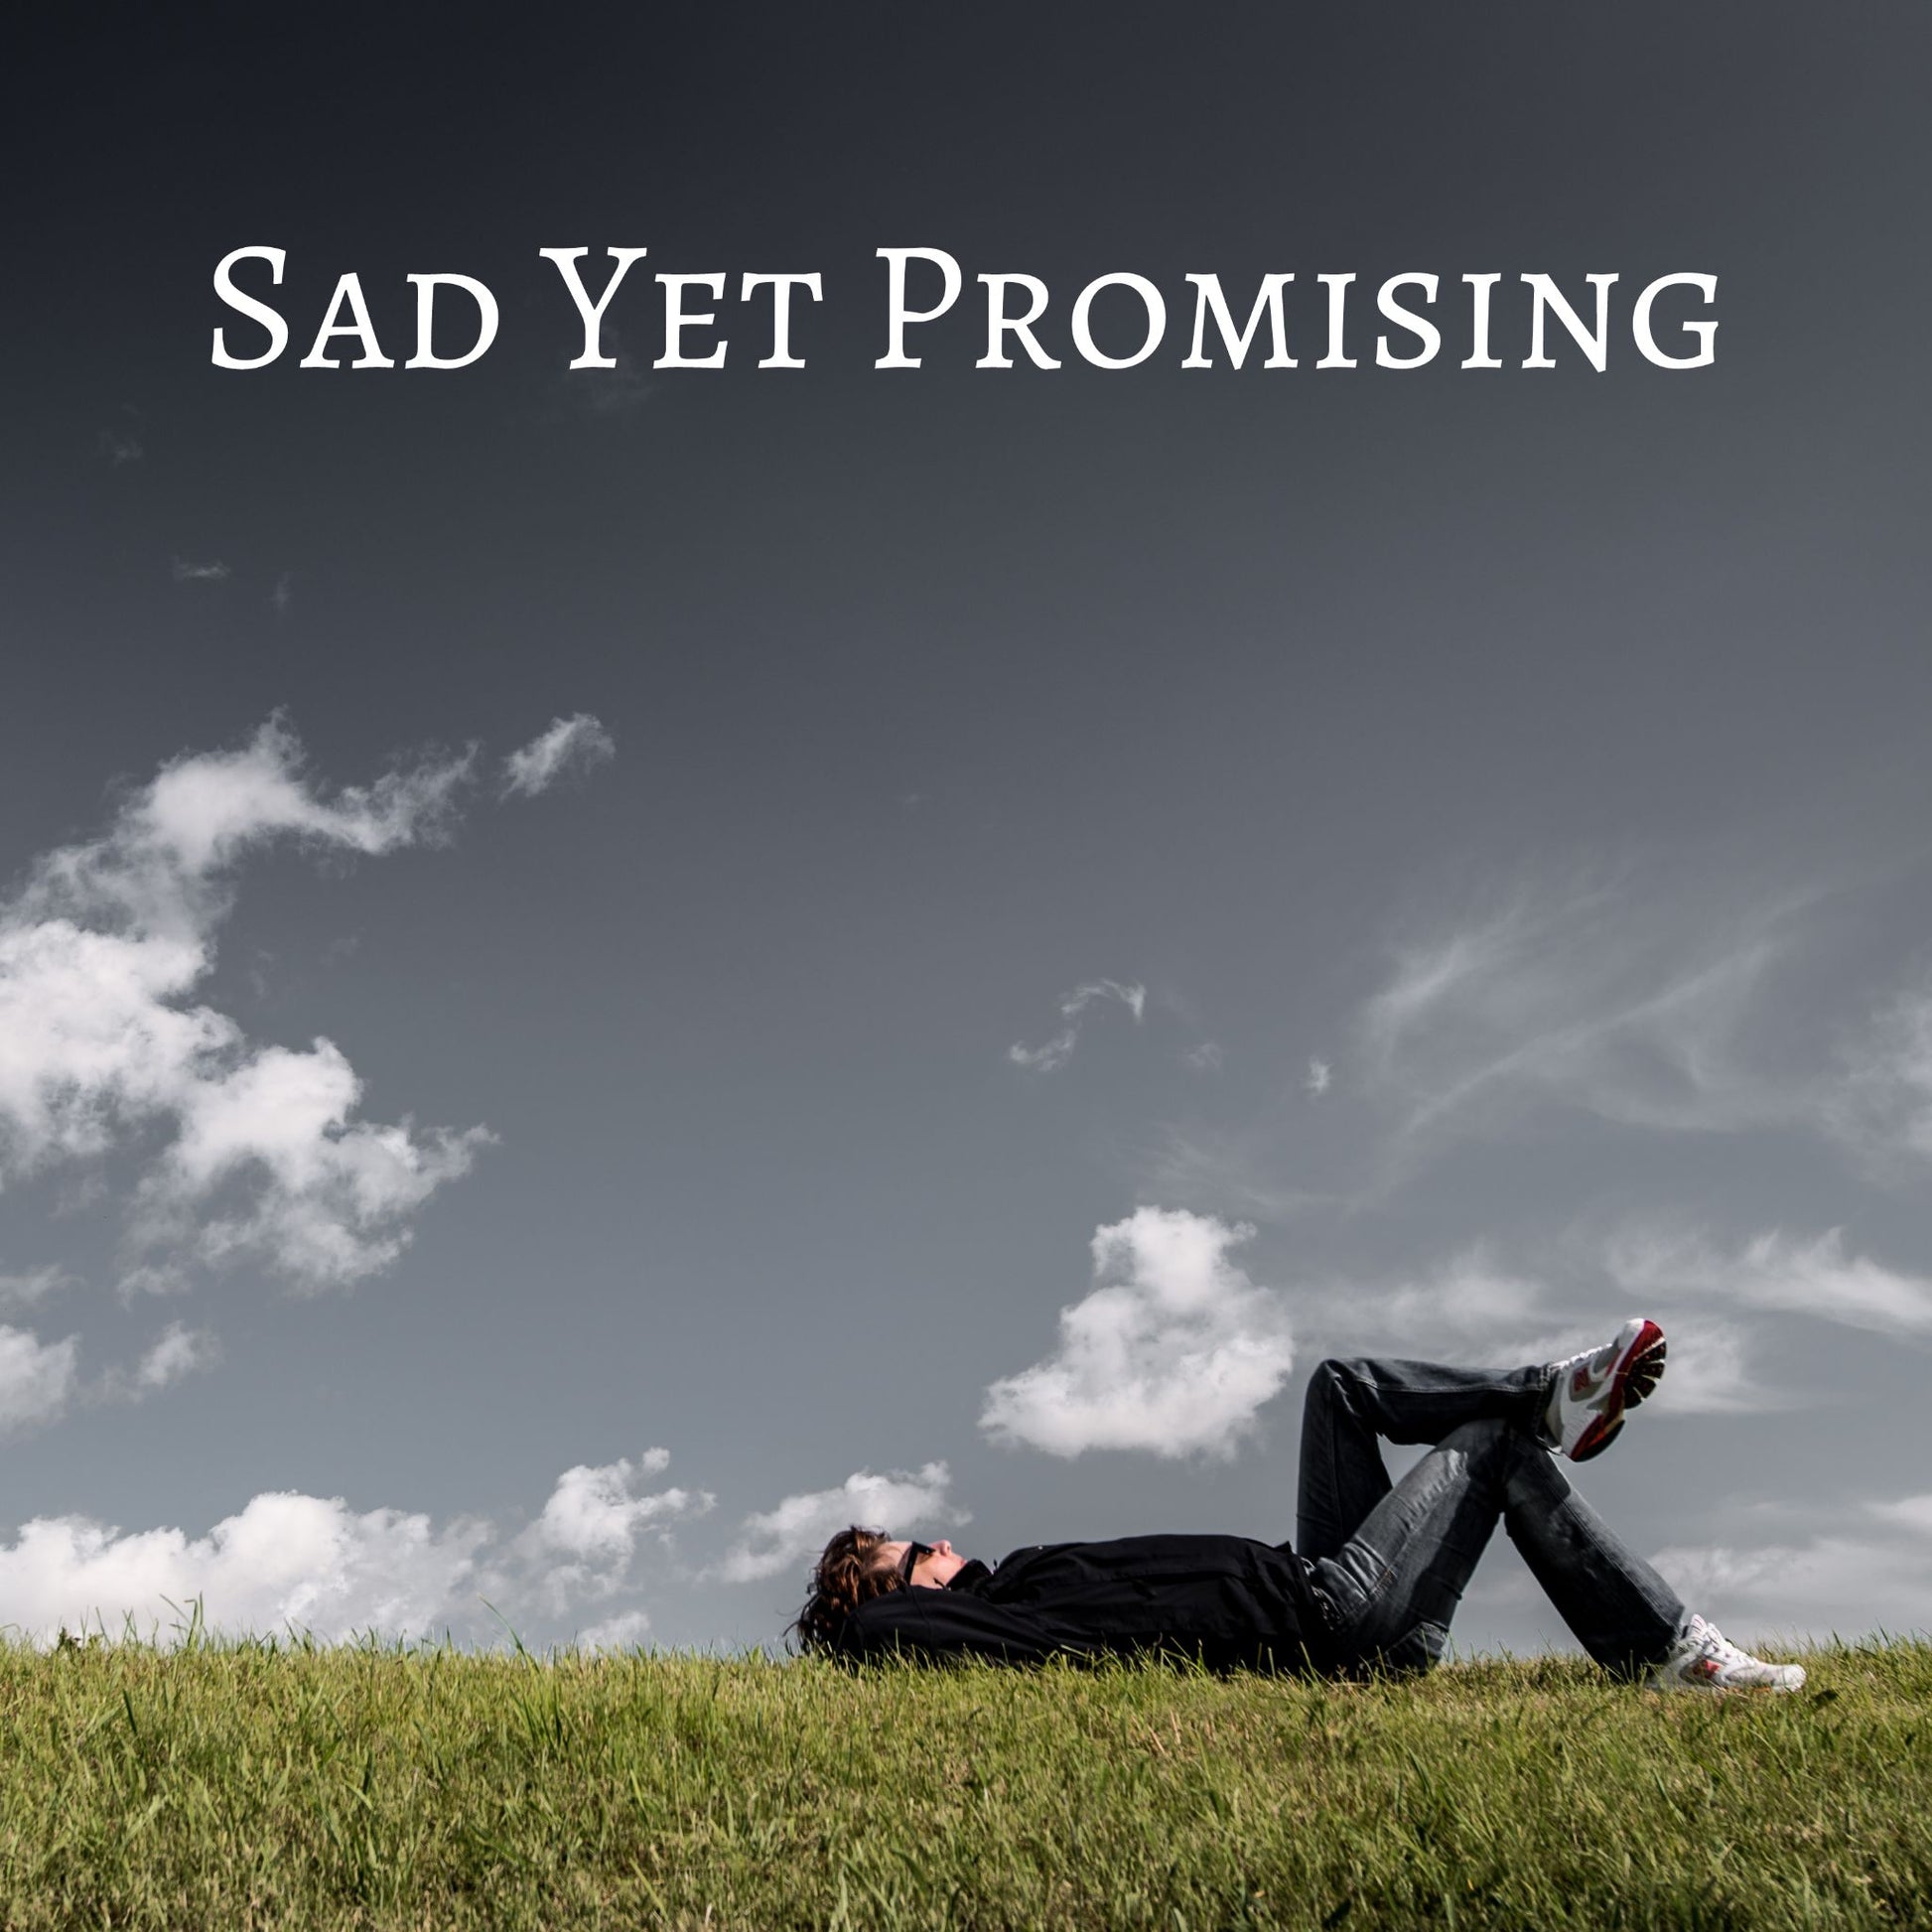 CD Cover of song Sad yet Promising